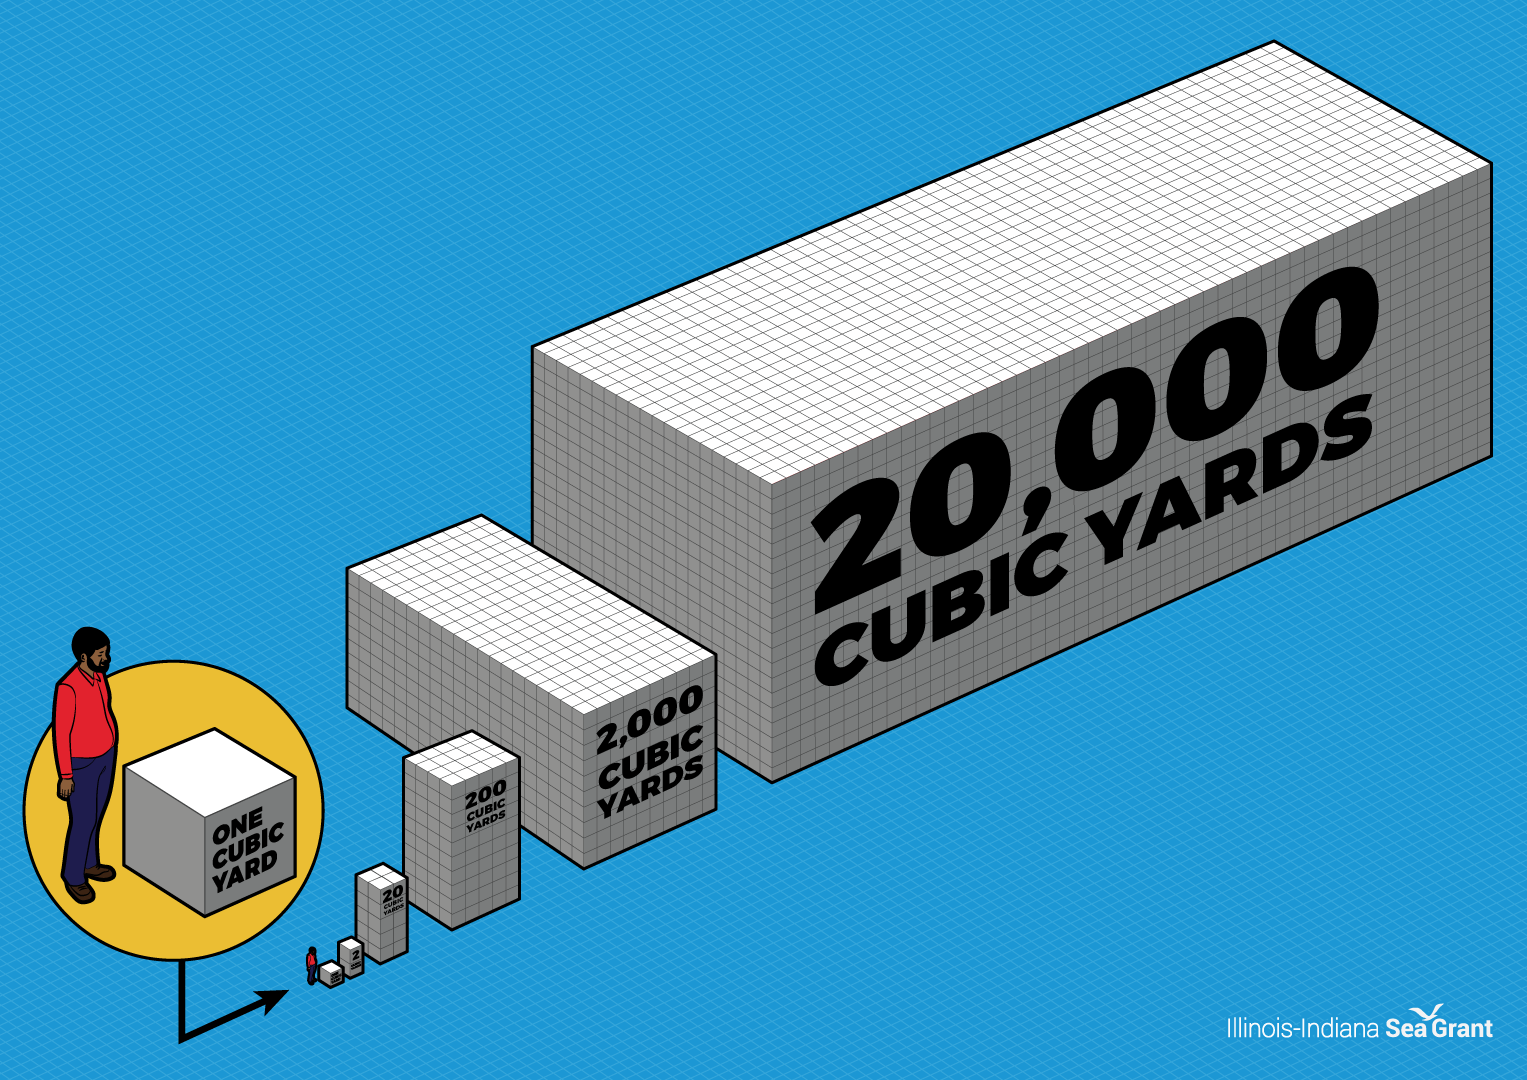 Volume/size of cubic yards